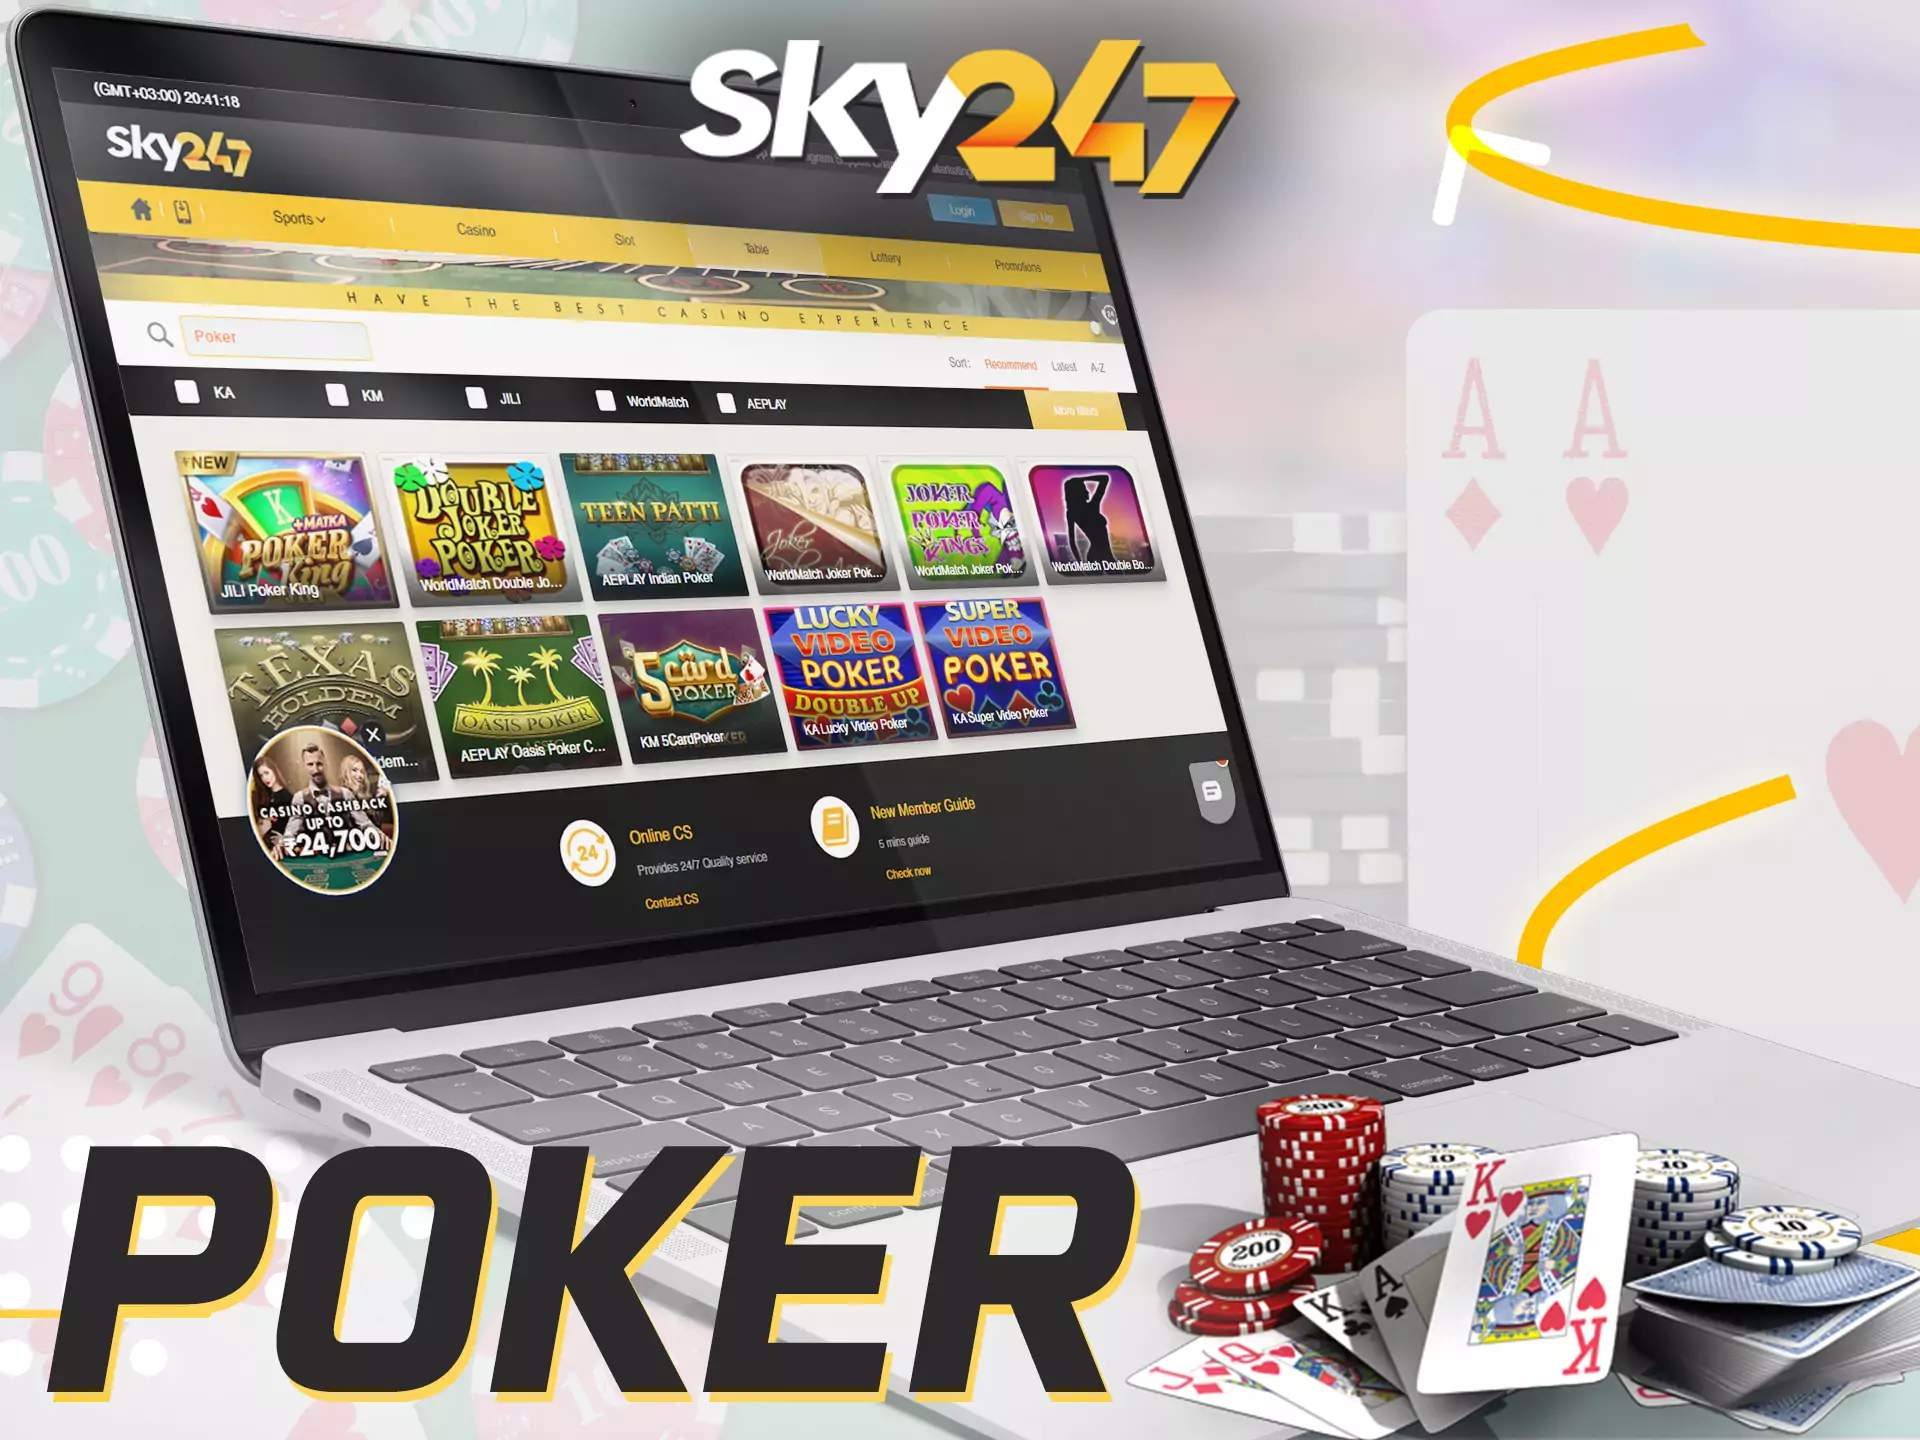 Sky247 has lots of poker rooms as well.